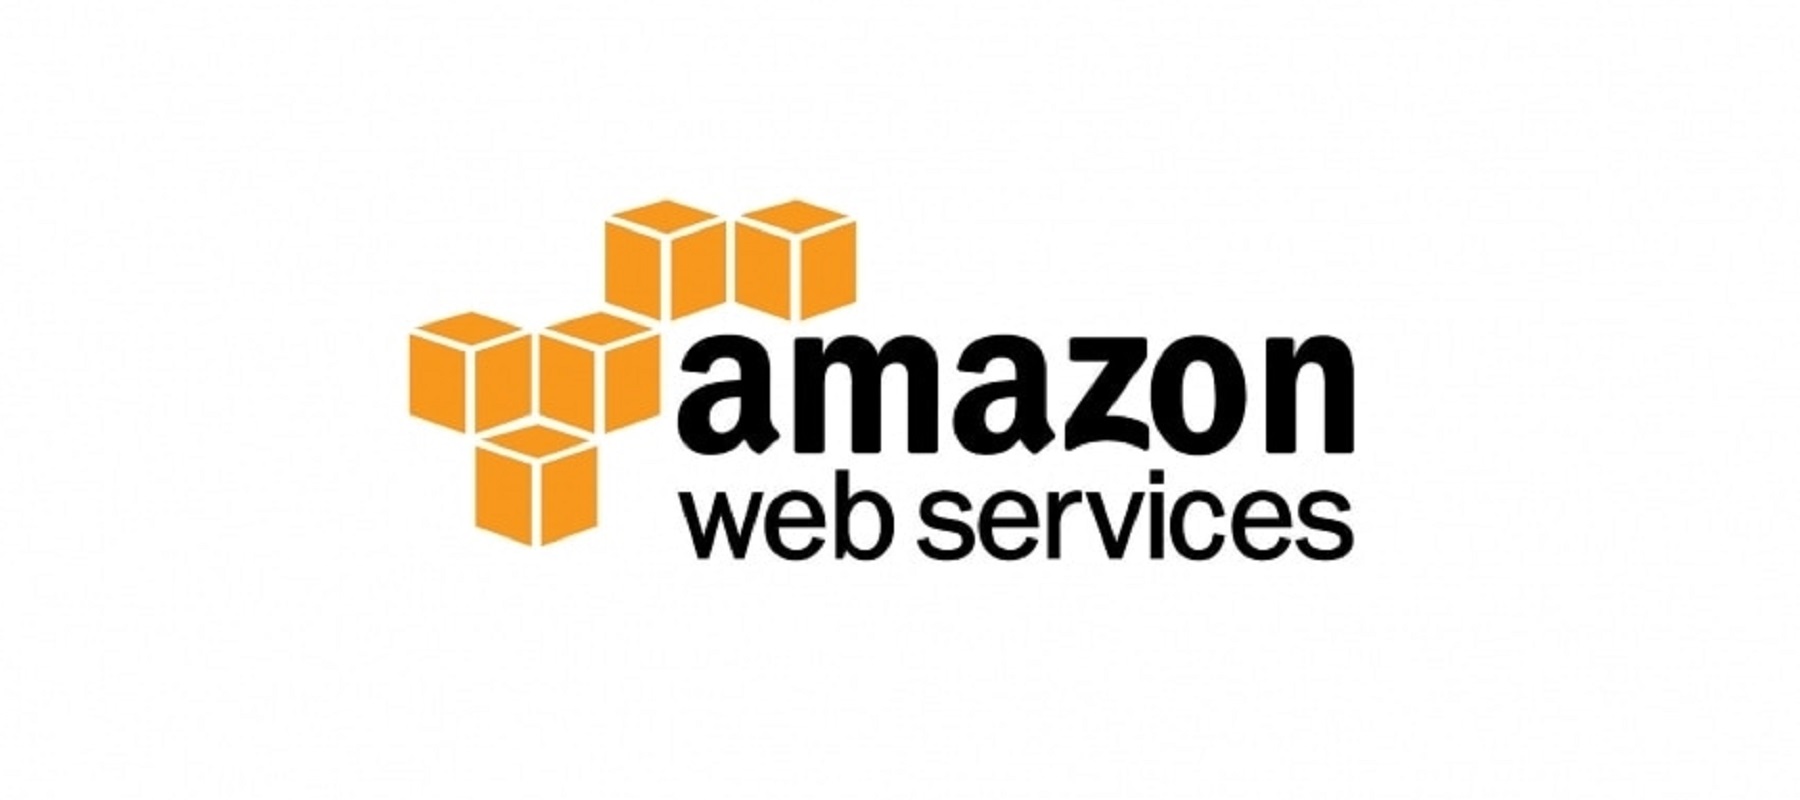 New Amazon Web Services build programme helps early-stage startups get their ideas off the ground